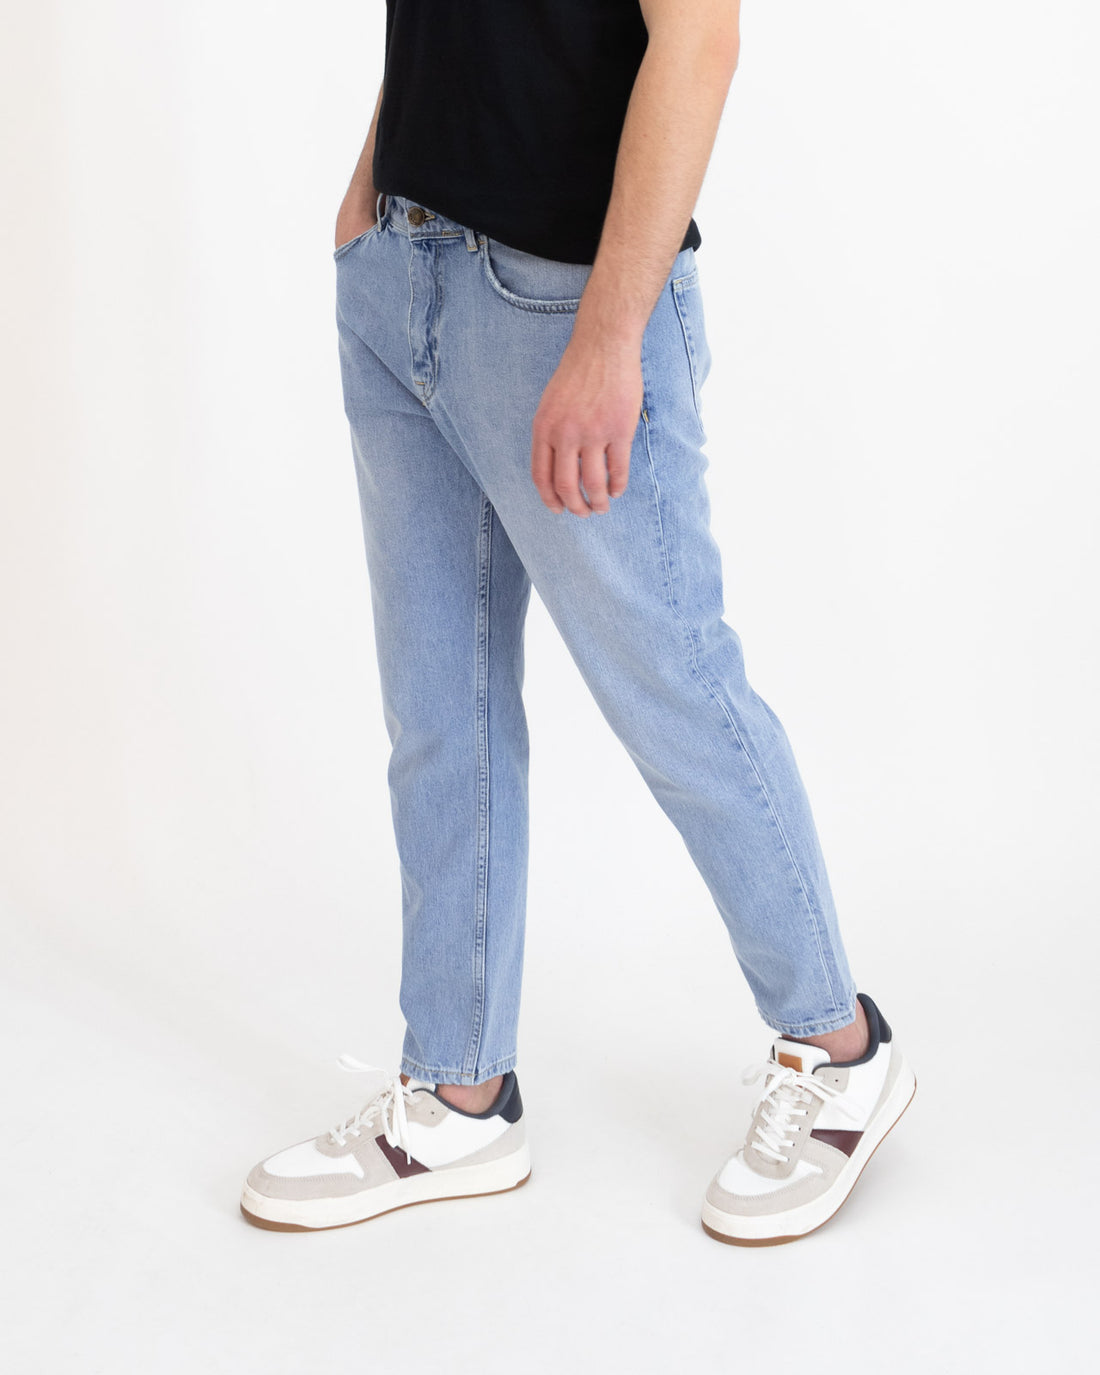 Light cropped fit jeans - PGrax